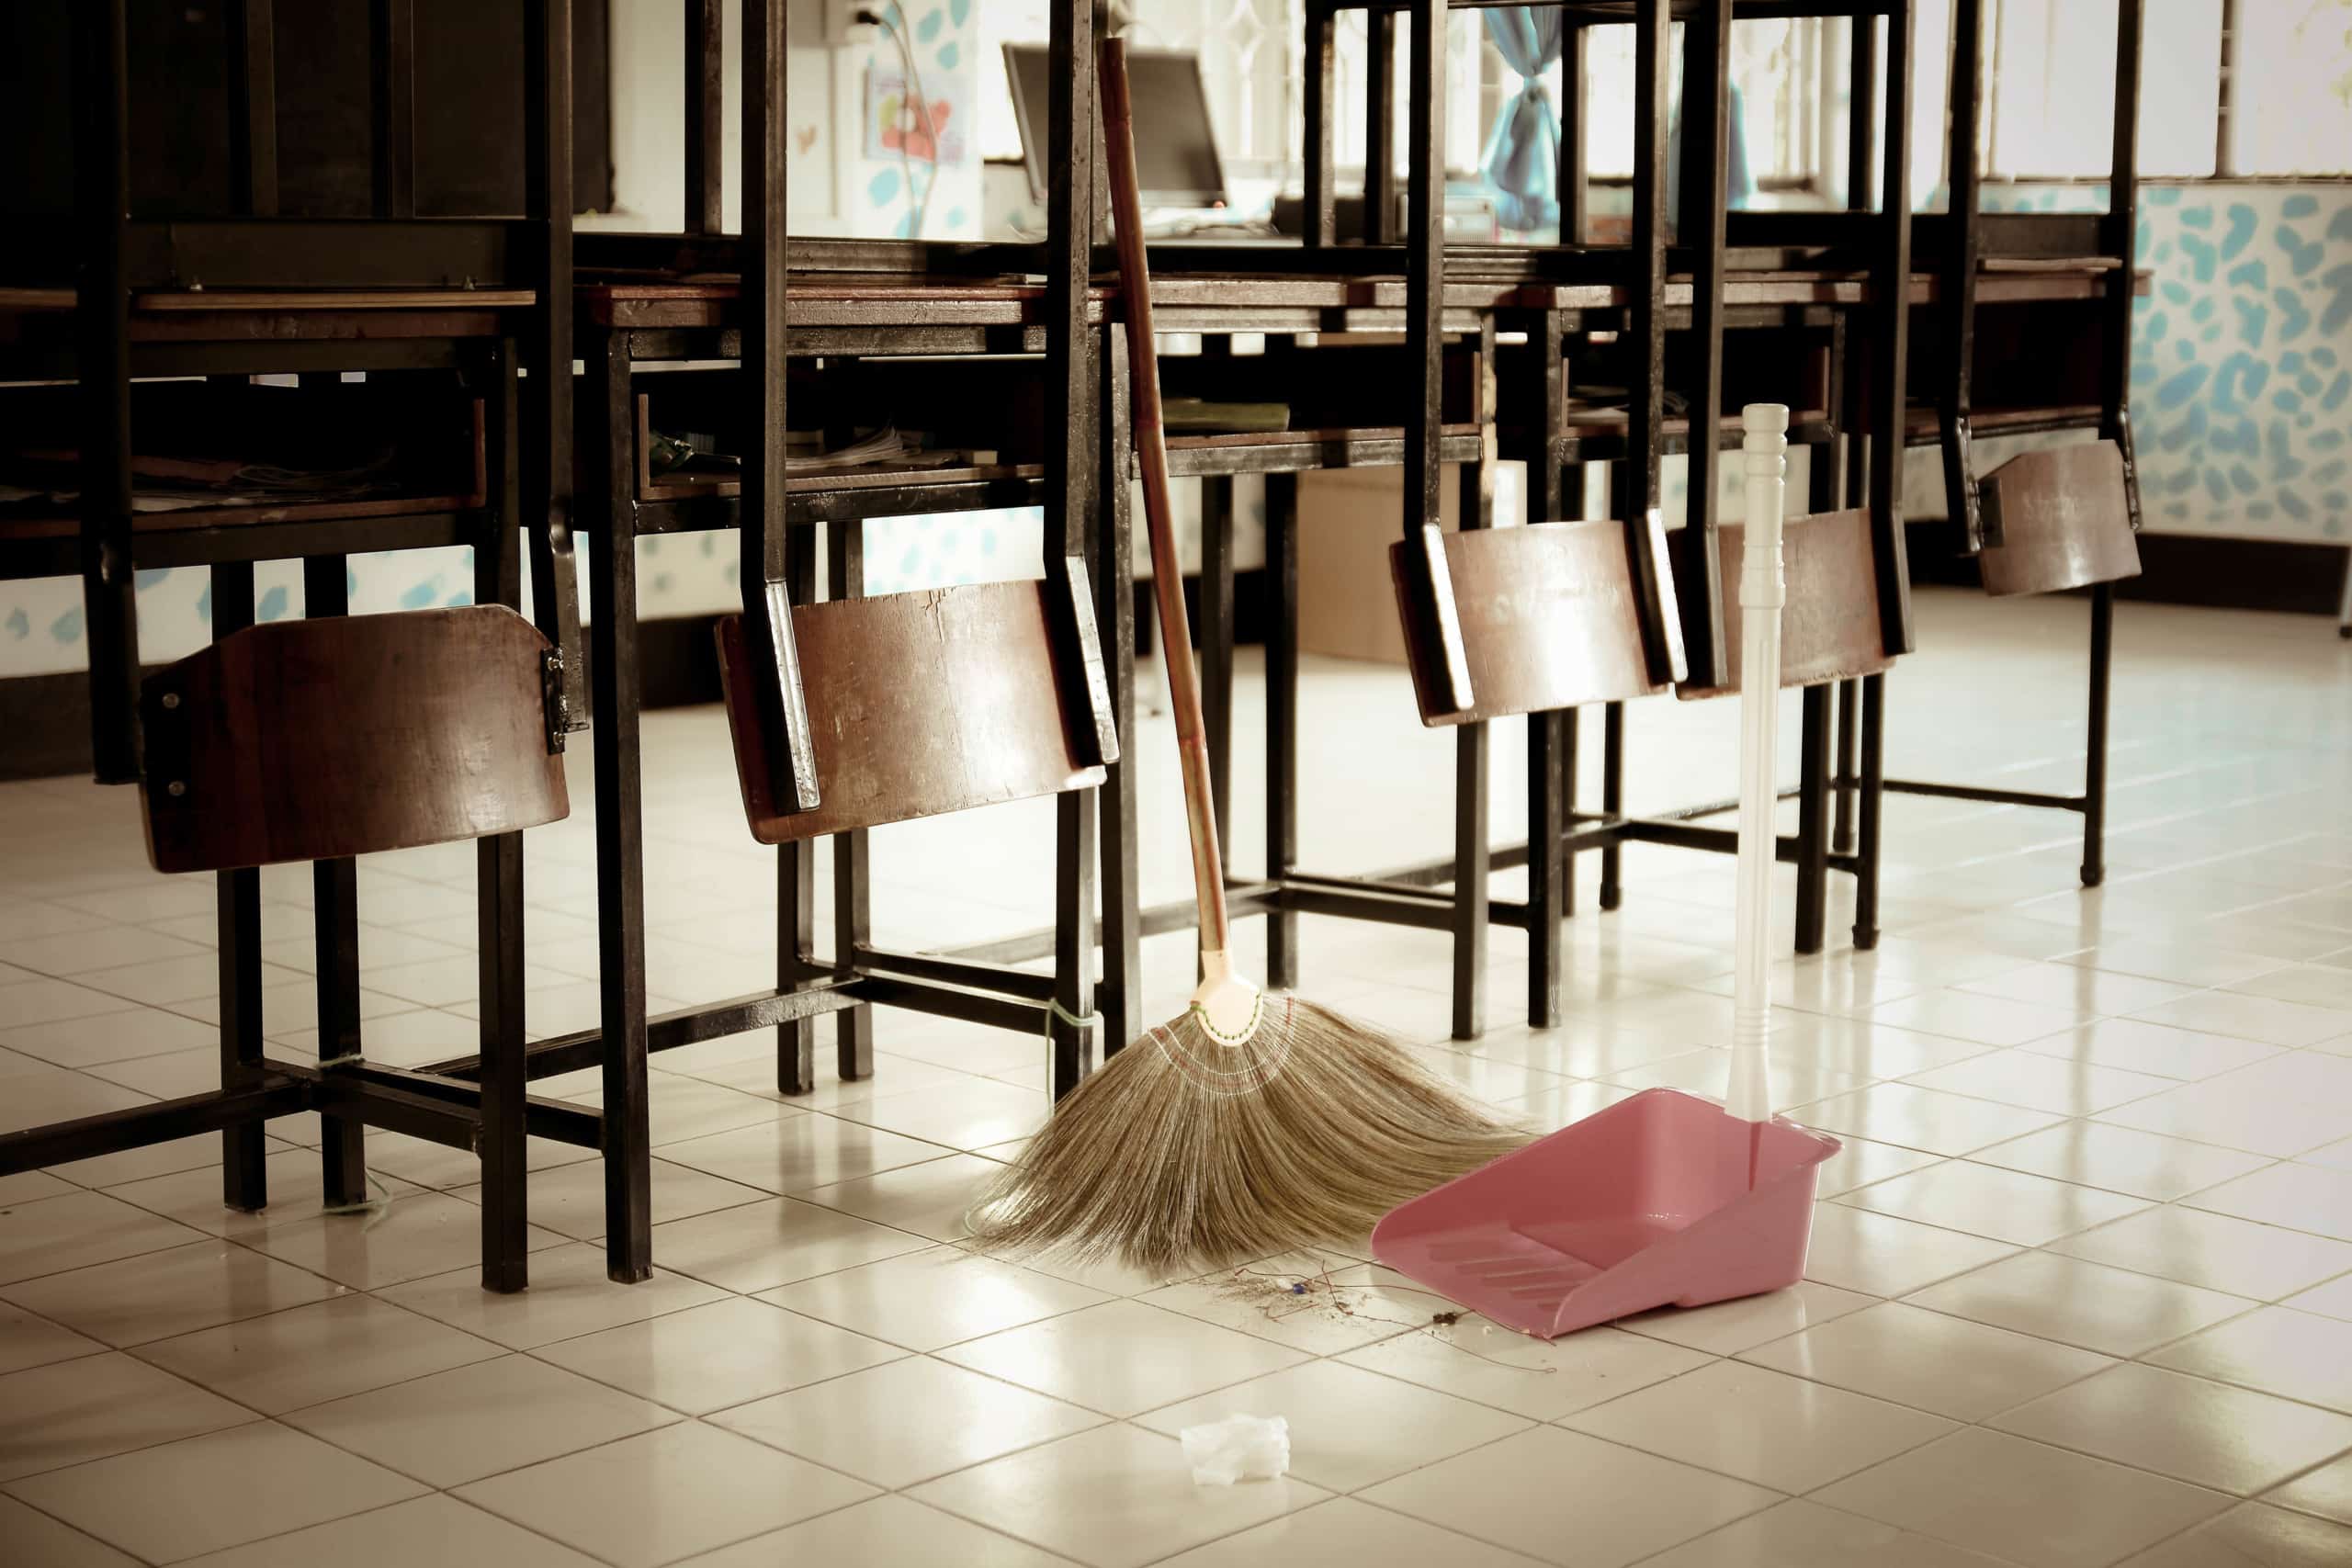 Classroom Cleaning With A Broom